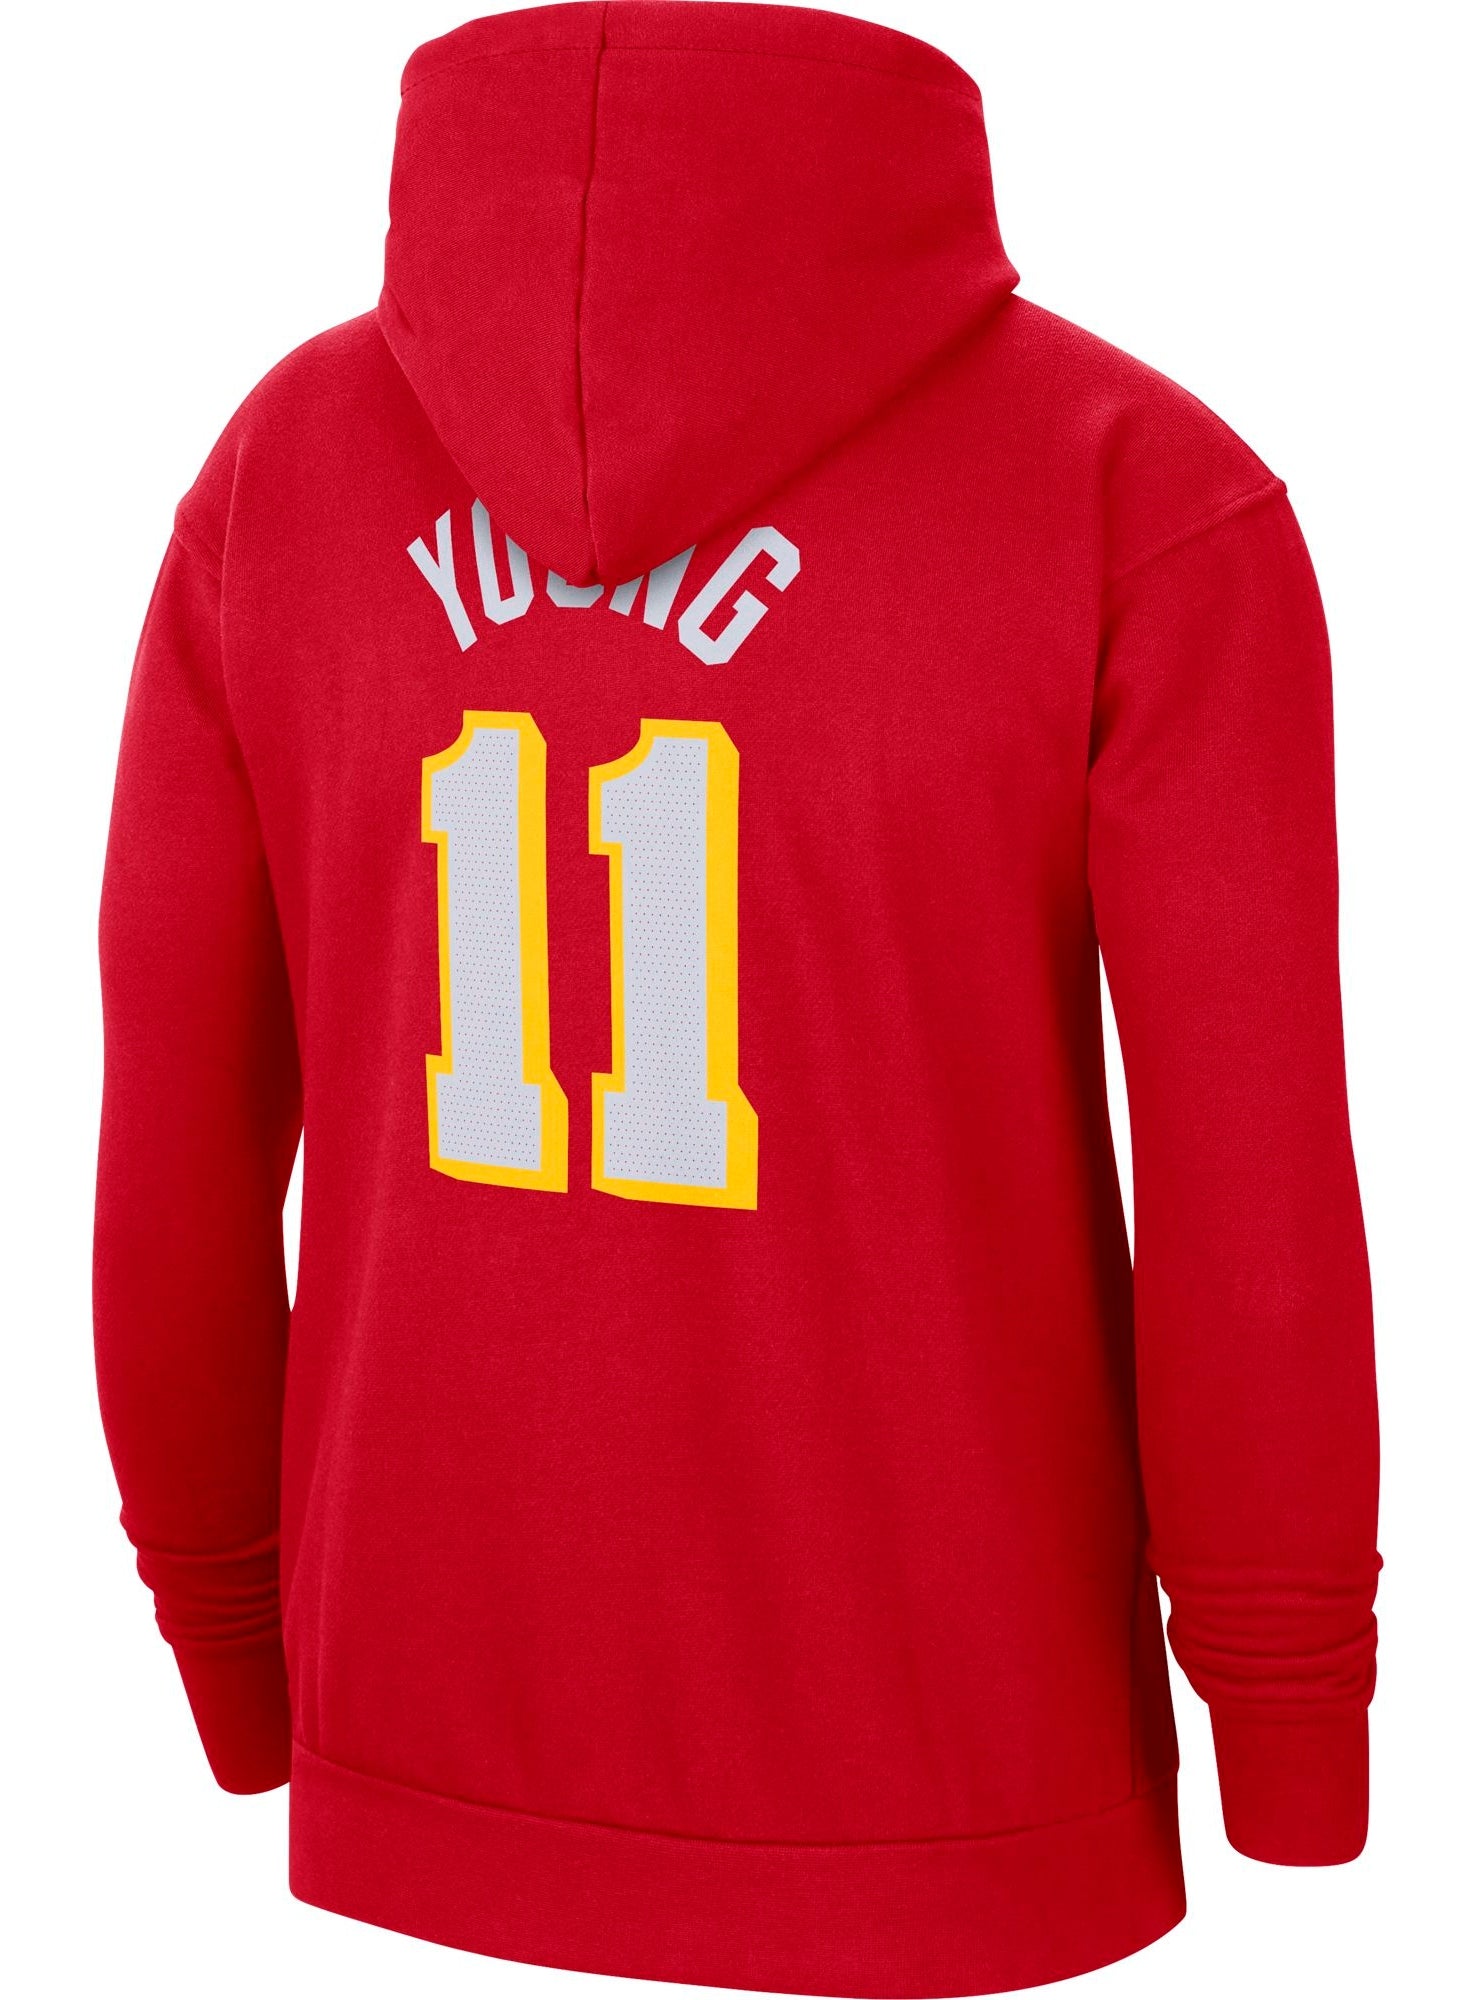 Young Nike Icon Edition Essential Hoodie - Hawks Shop